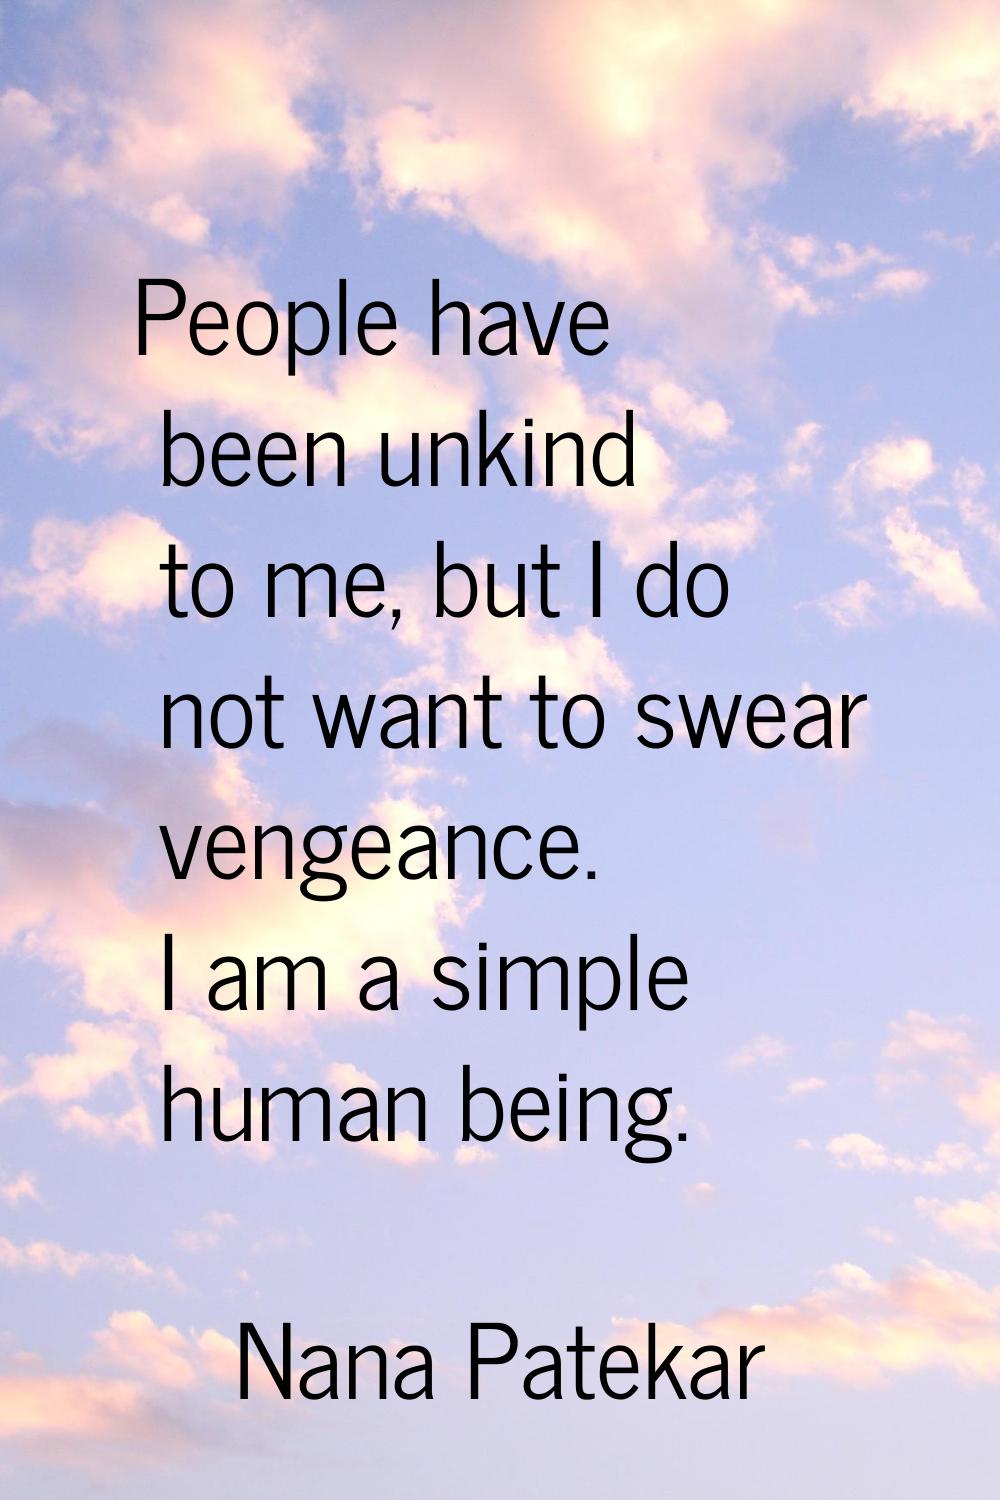 People have been unkind to me, but I do not want to swear vengeance. I am a simple human being.